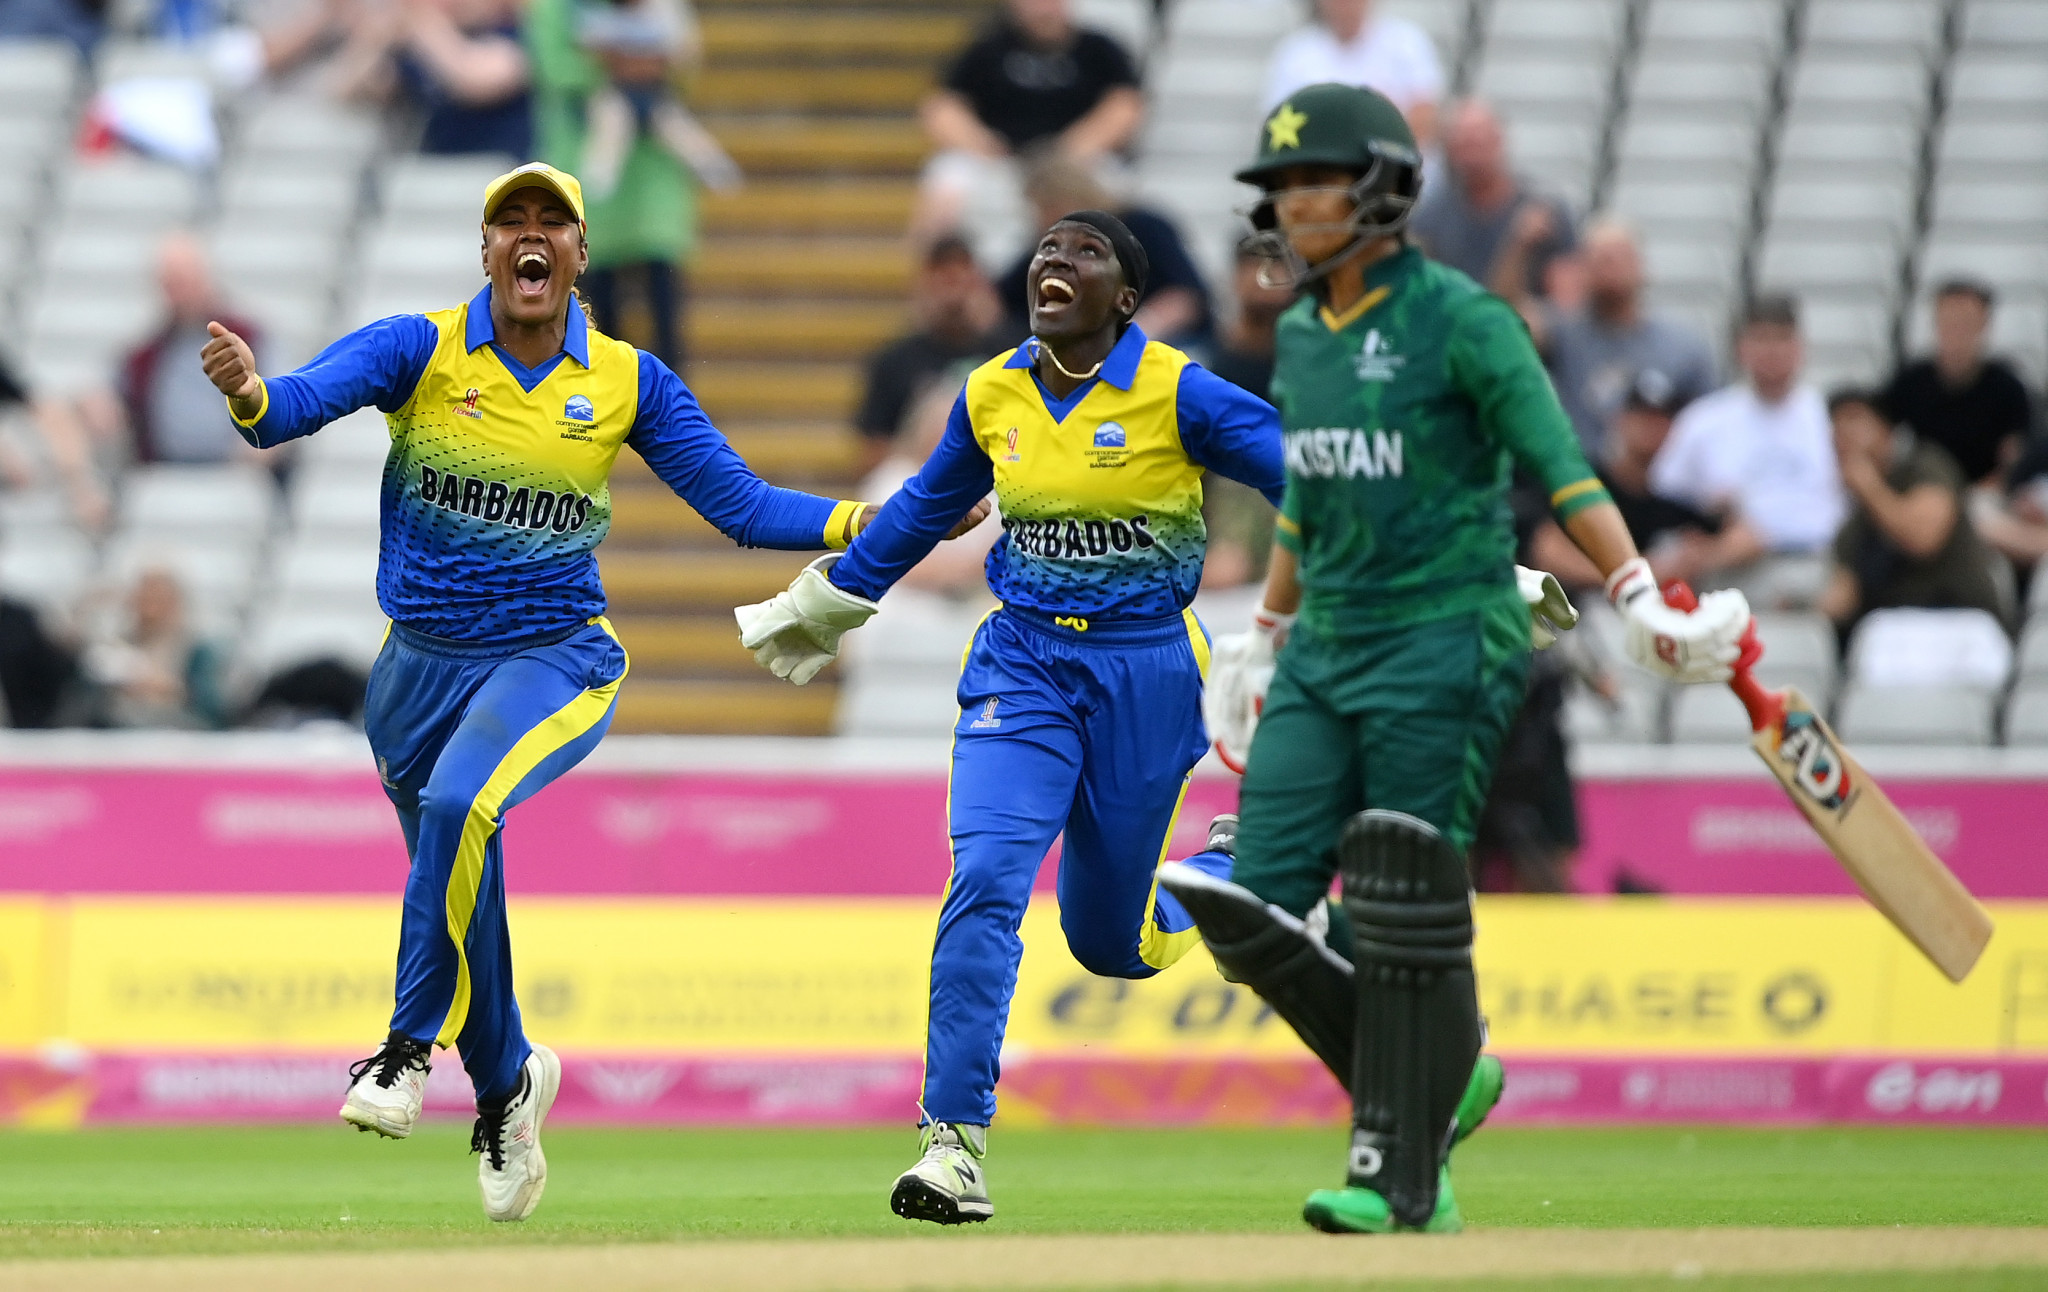 Barbados represented the Caribbean in cricket at the 2022 Commonwealth Games in Birmingham ©Getty Images